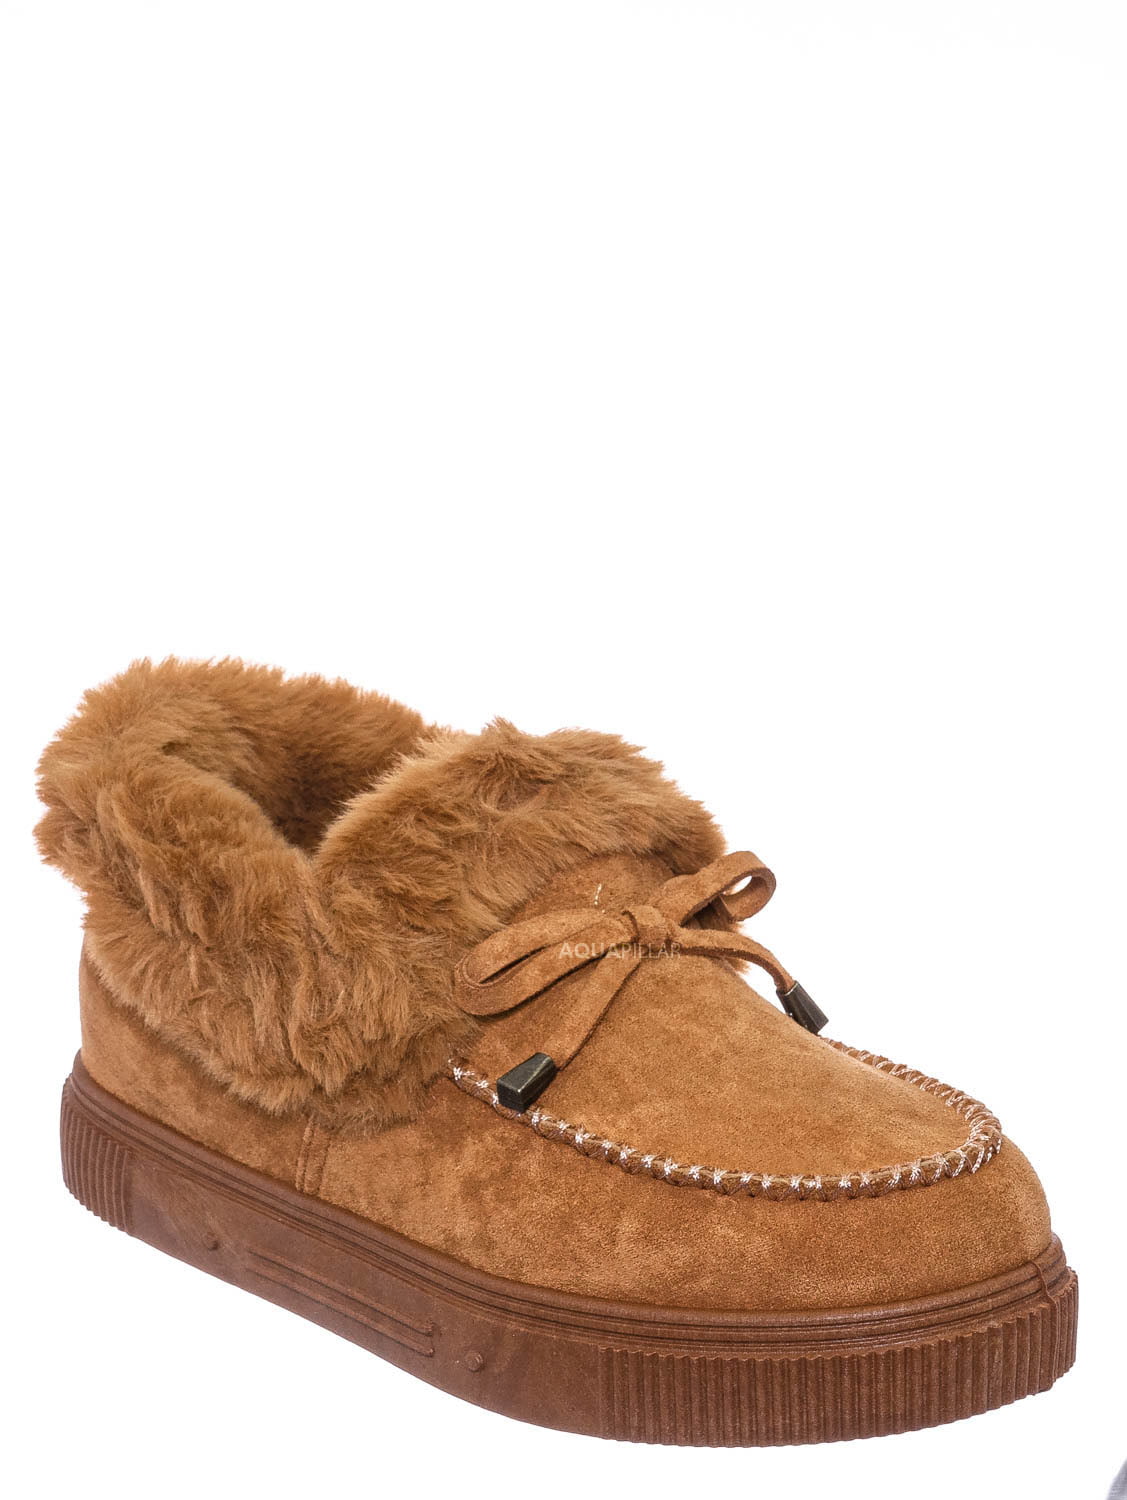 moccasin boots with fur